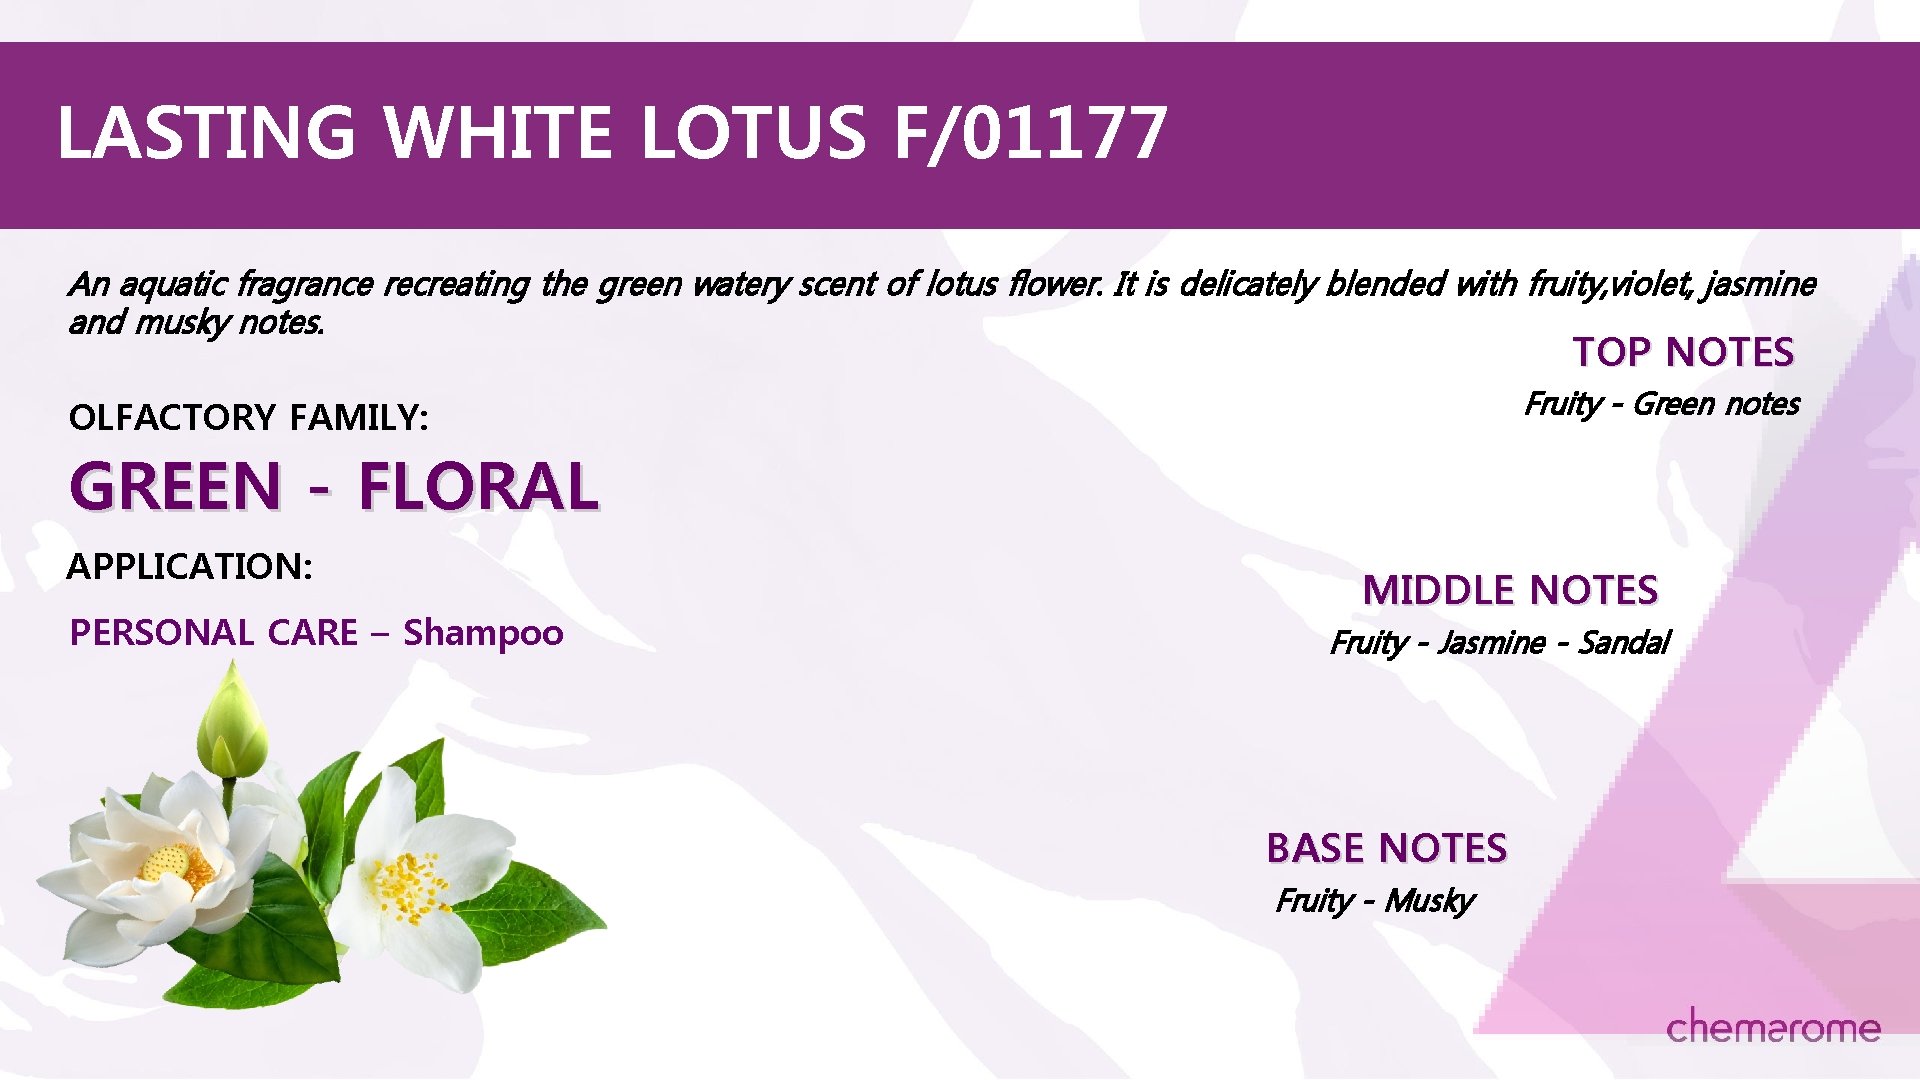 LASTING WHITE LOTUS F/01177 An aquatic fragrance recreating the green watery scent of lotus